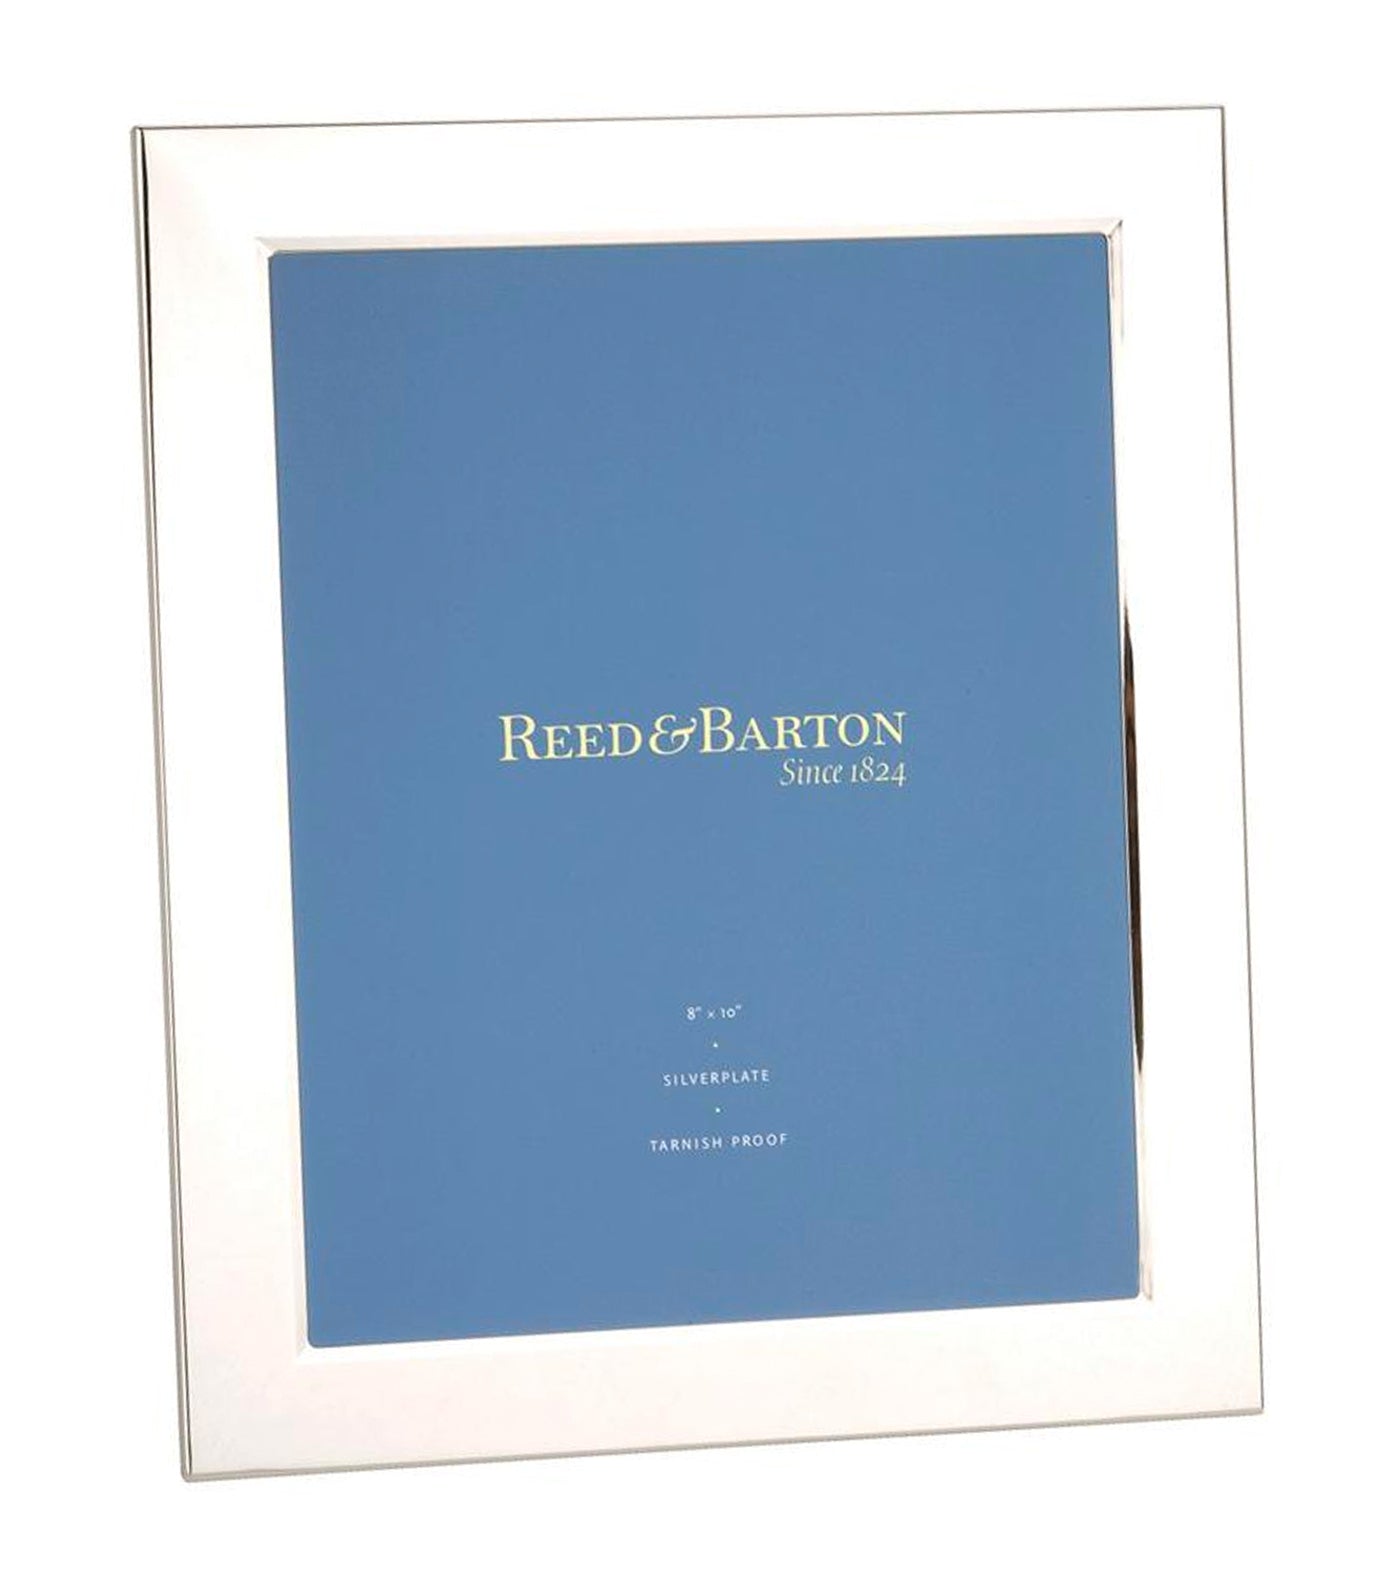 Reed & Barton Classic Silverplate Picture Frame - 8in x 10in